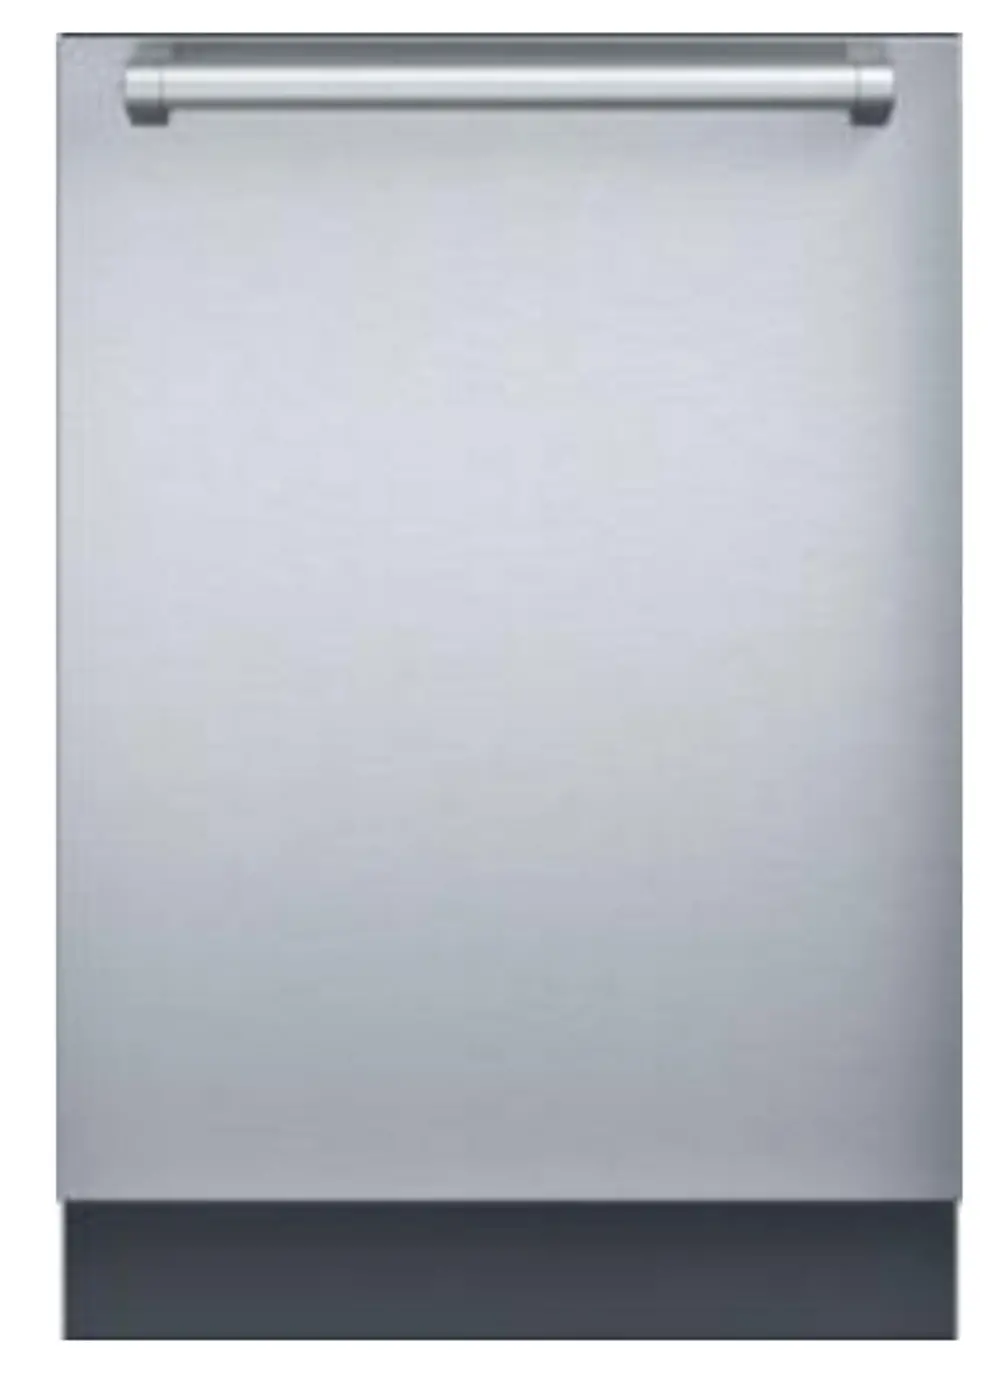 DWHD650JFP Thermador Stainless Steel Dishwasher-1